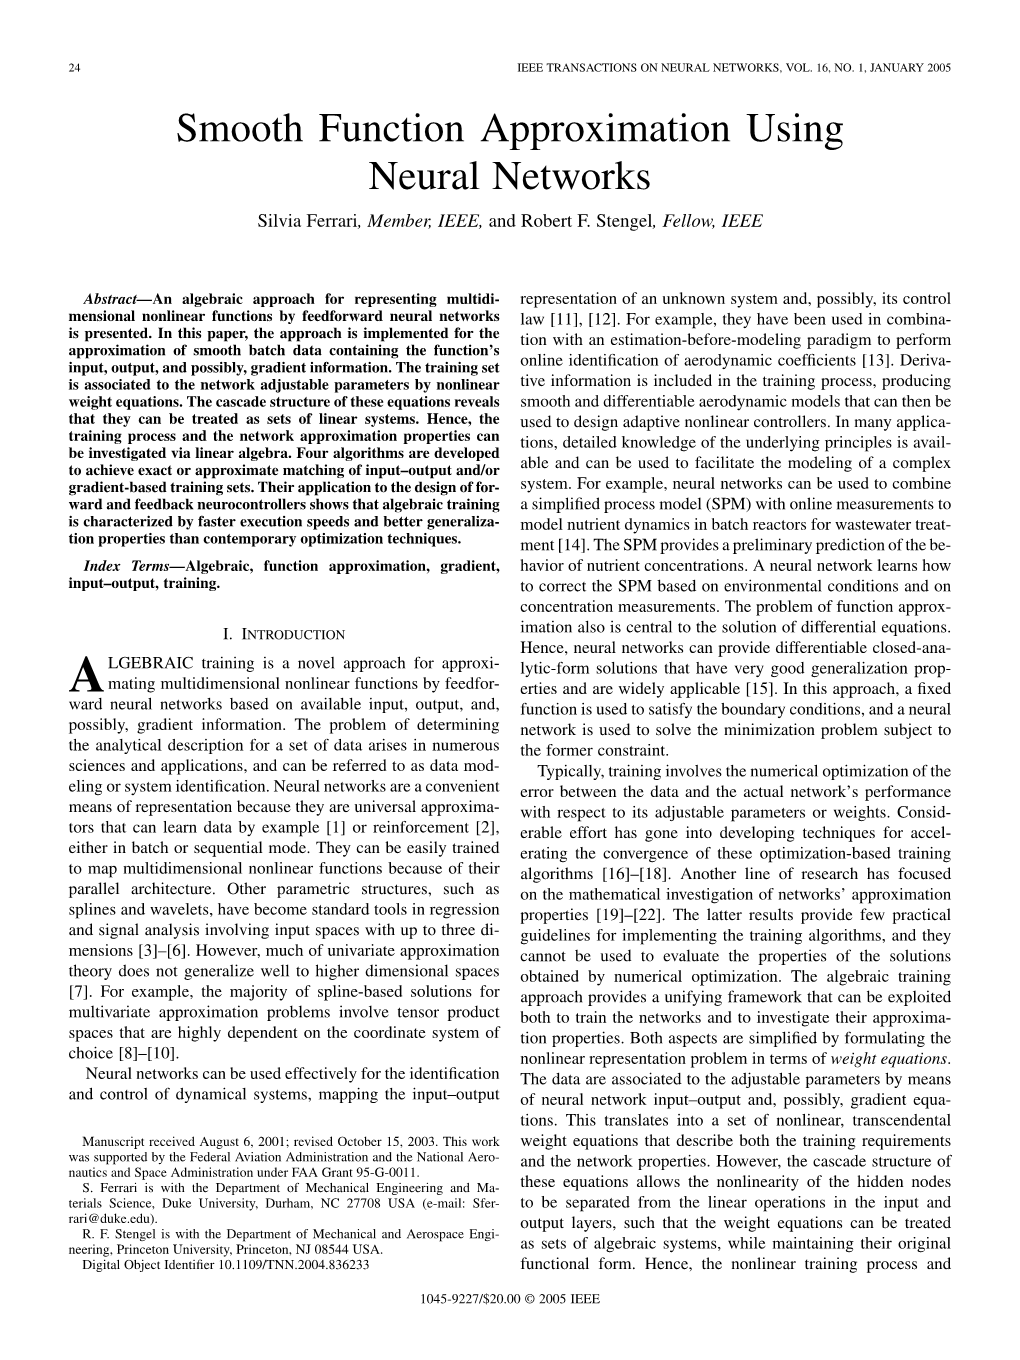 Smooth Function Approximation Using Neural Networks Silvia Ferrari, Member, IEEE, and Robert F